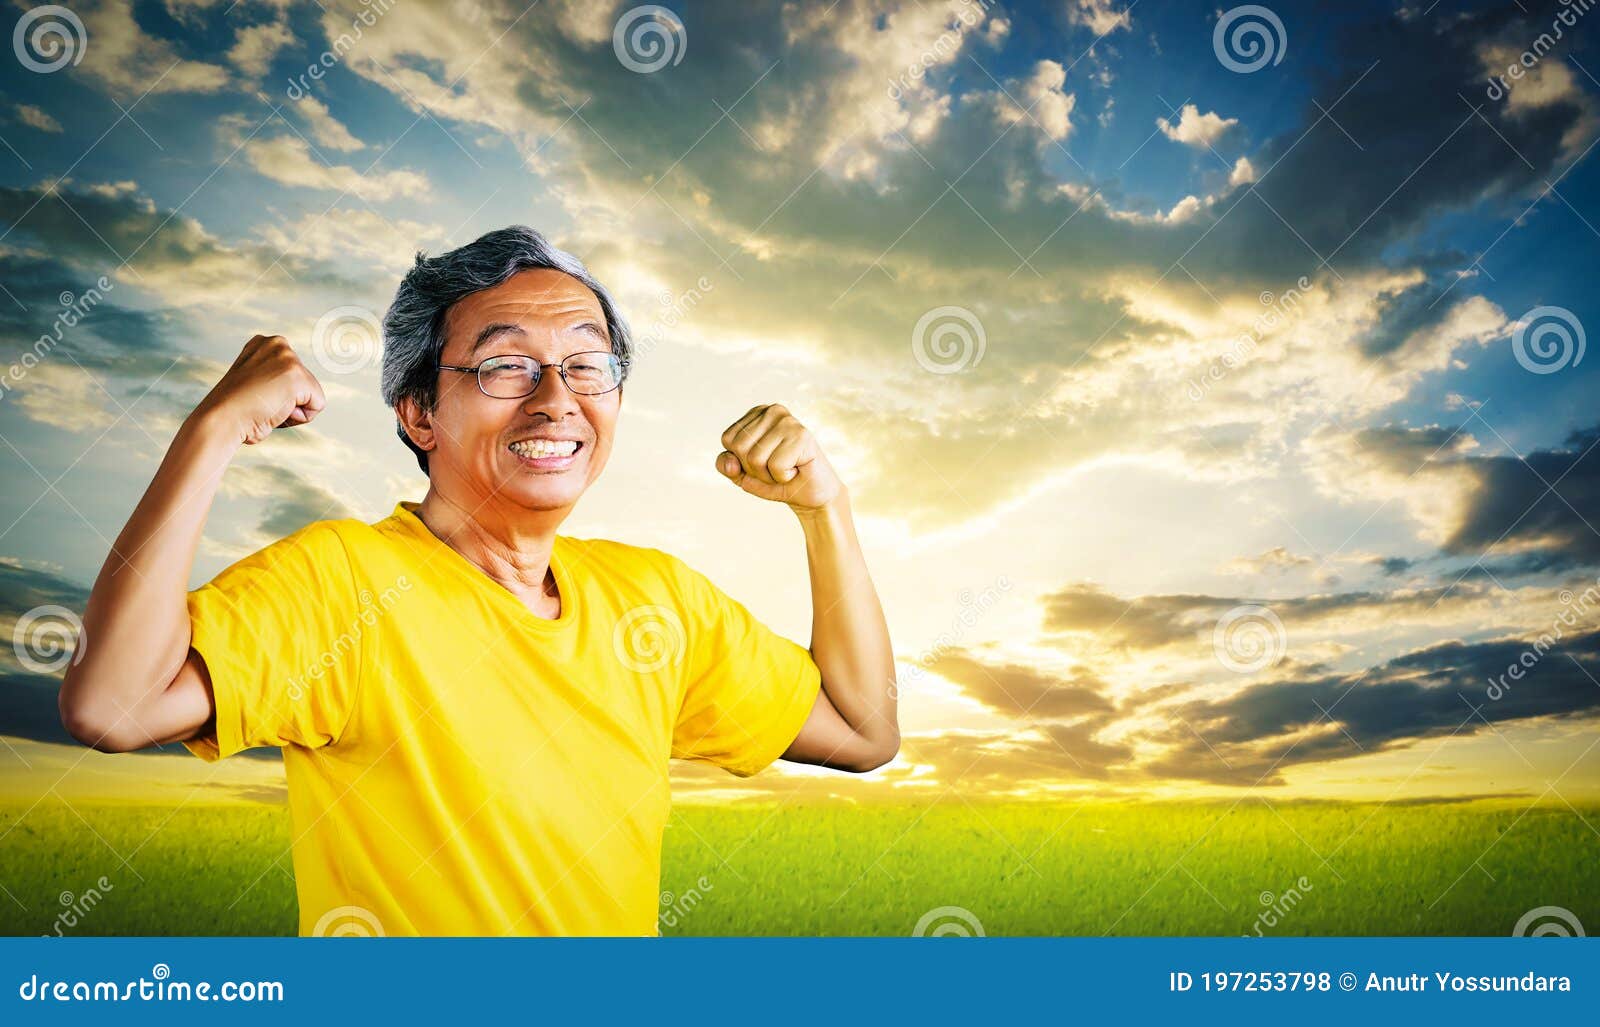 senior man showing off muscle for strong healthy lifestye concept with golden nature sky background